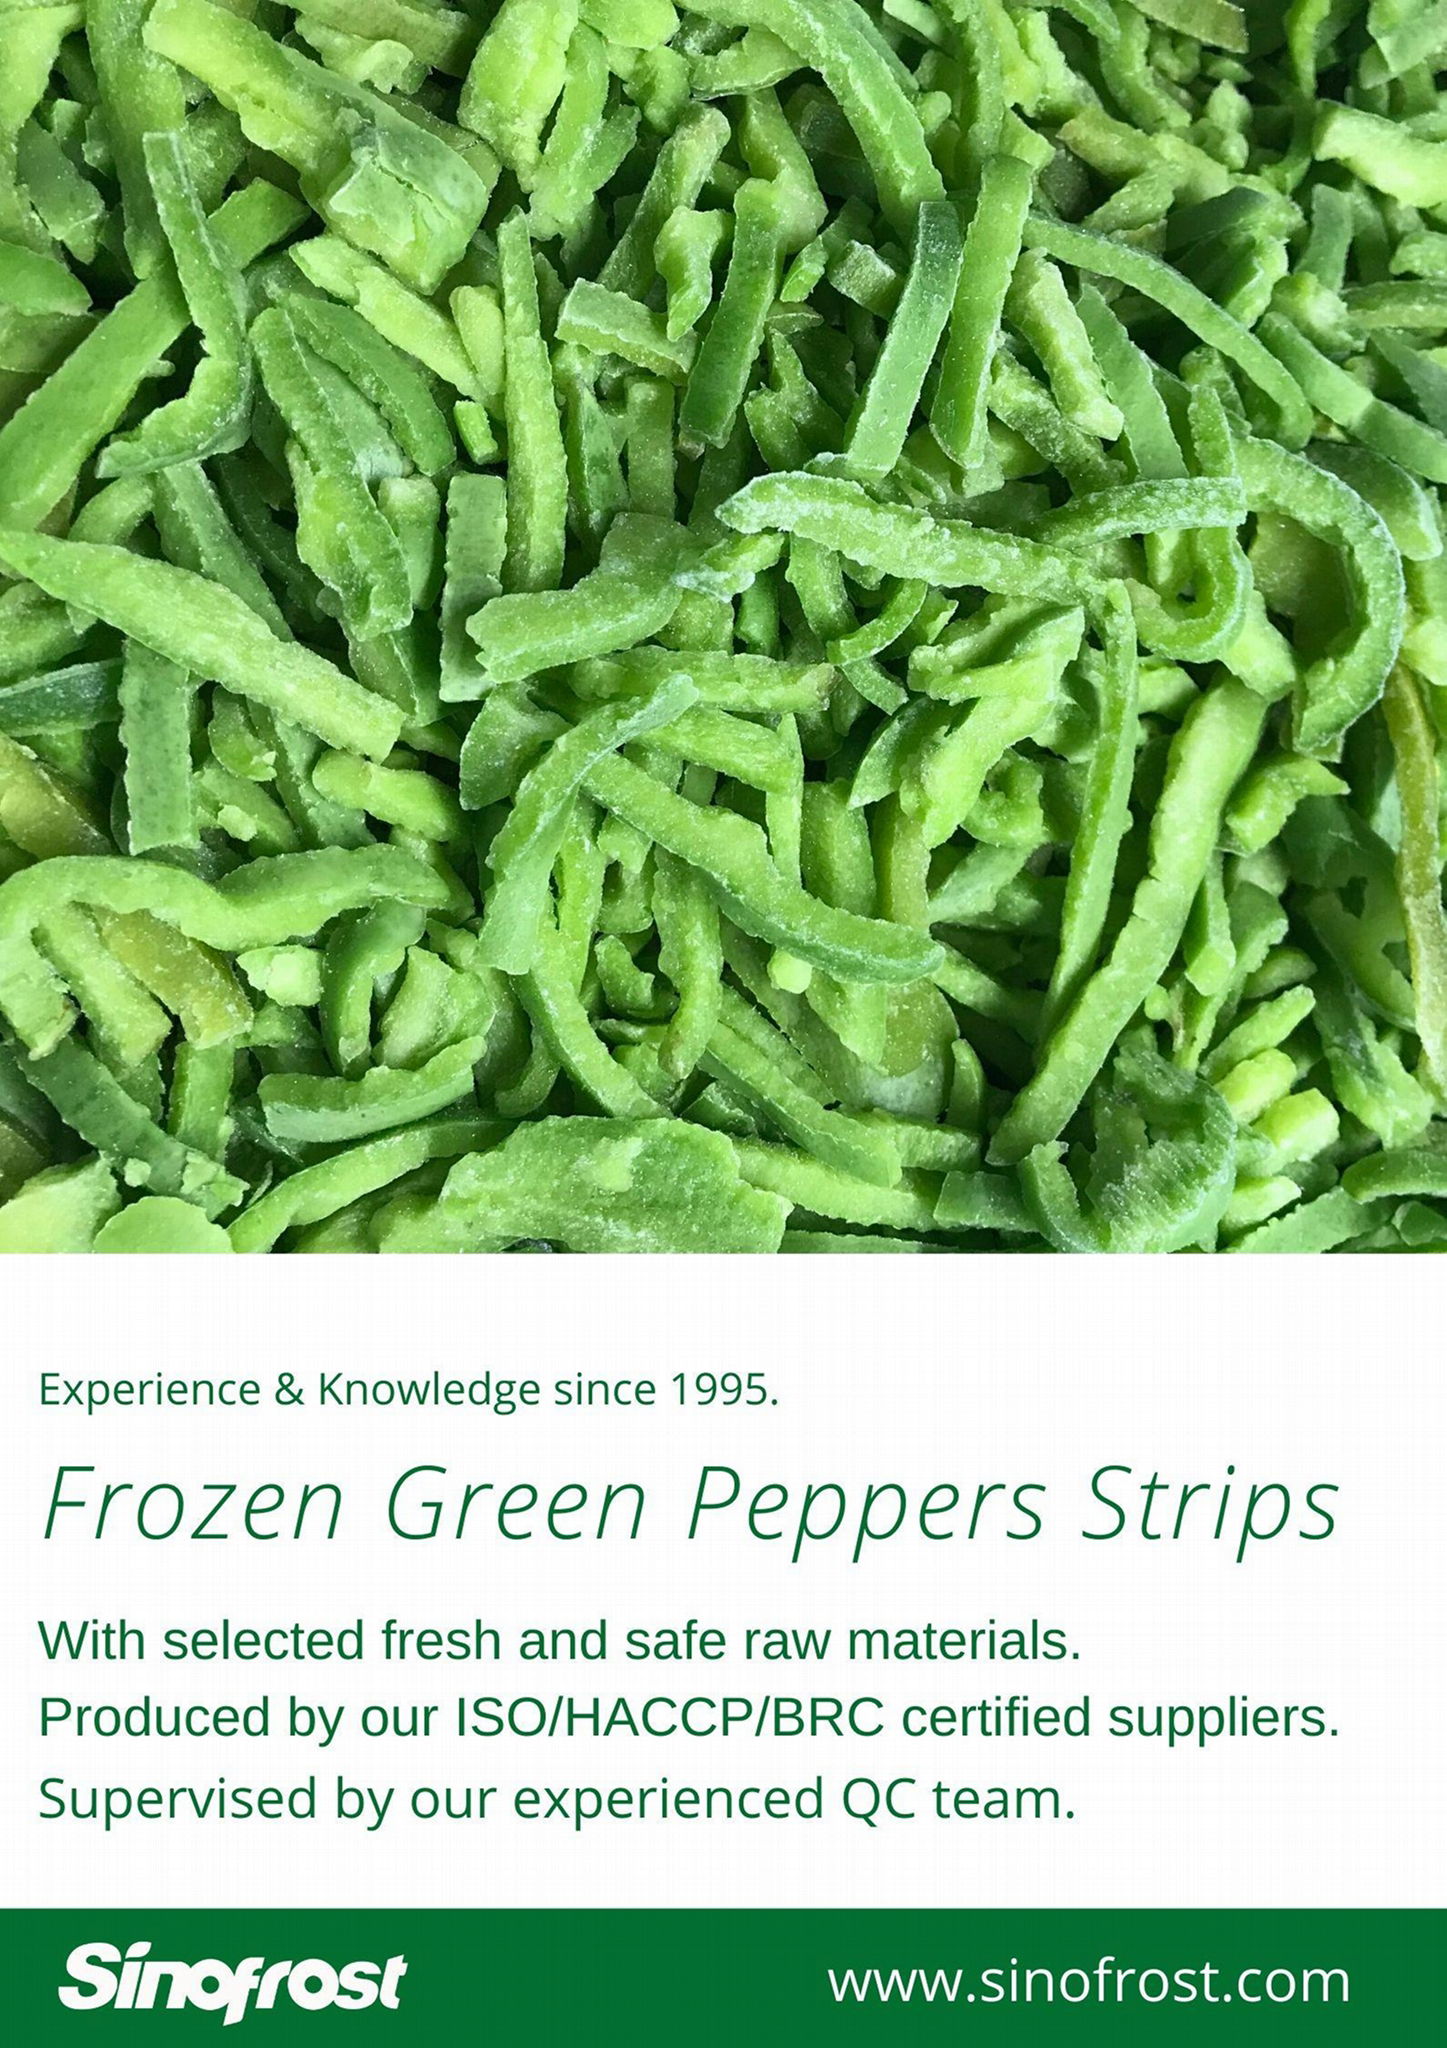 IQF Green Pepper Strips,Frozen Green Peppers Strips,IQF Sliced Green Peppers 2